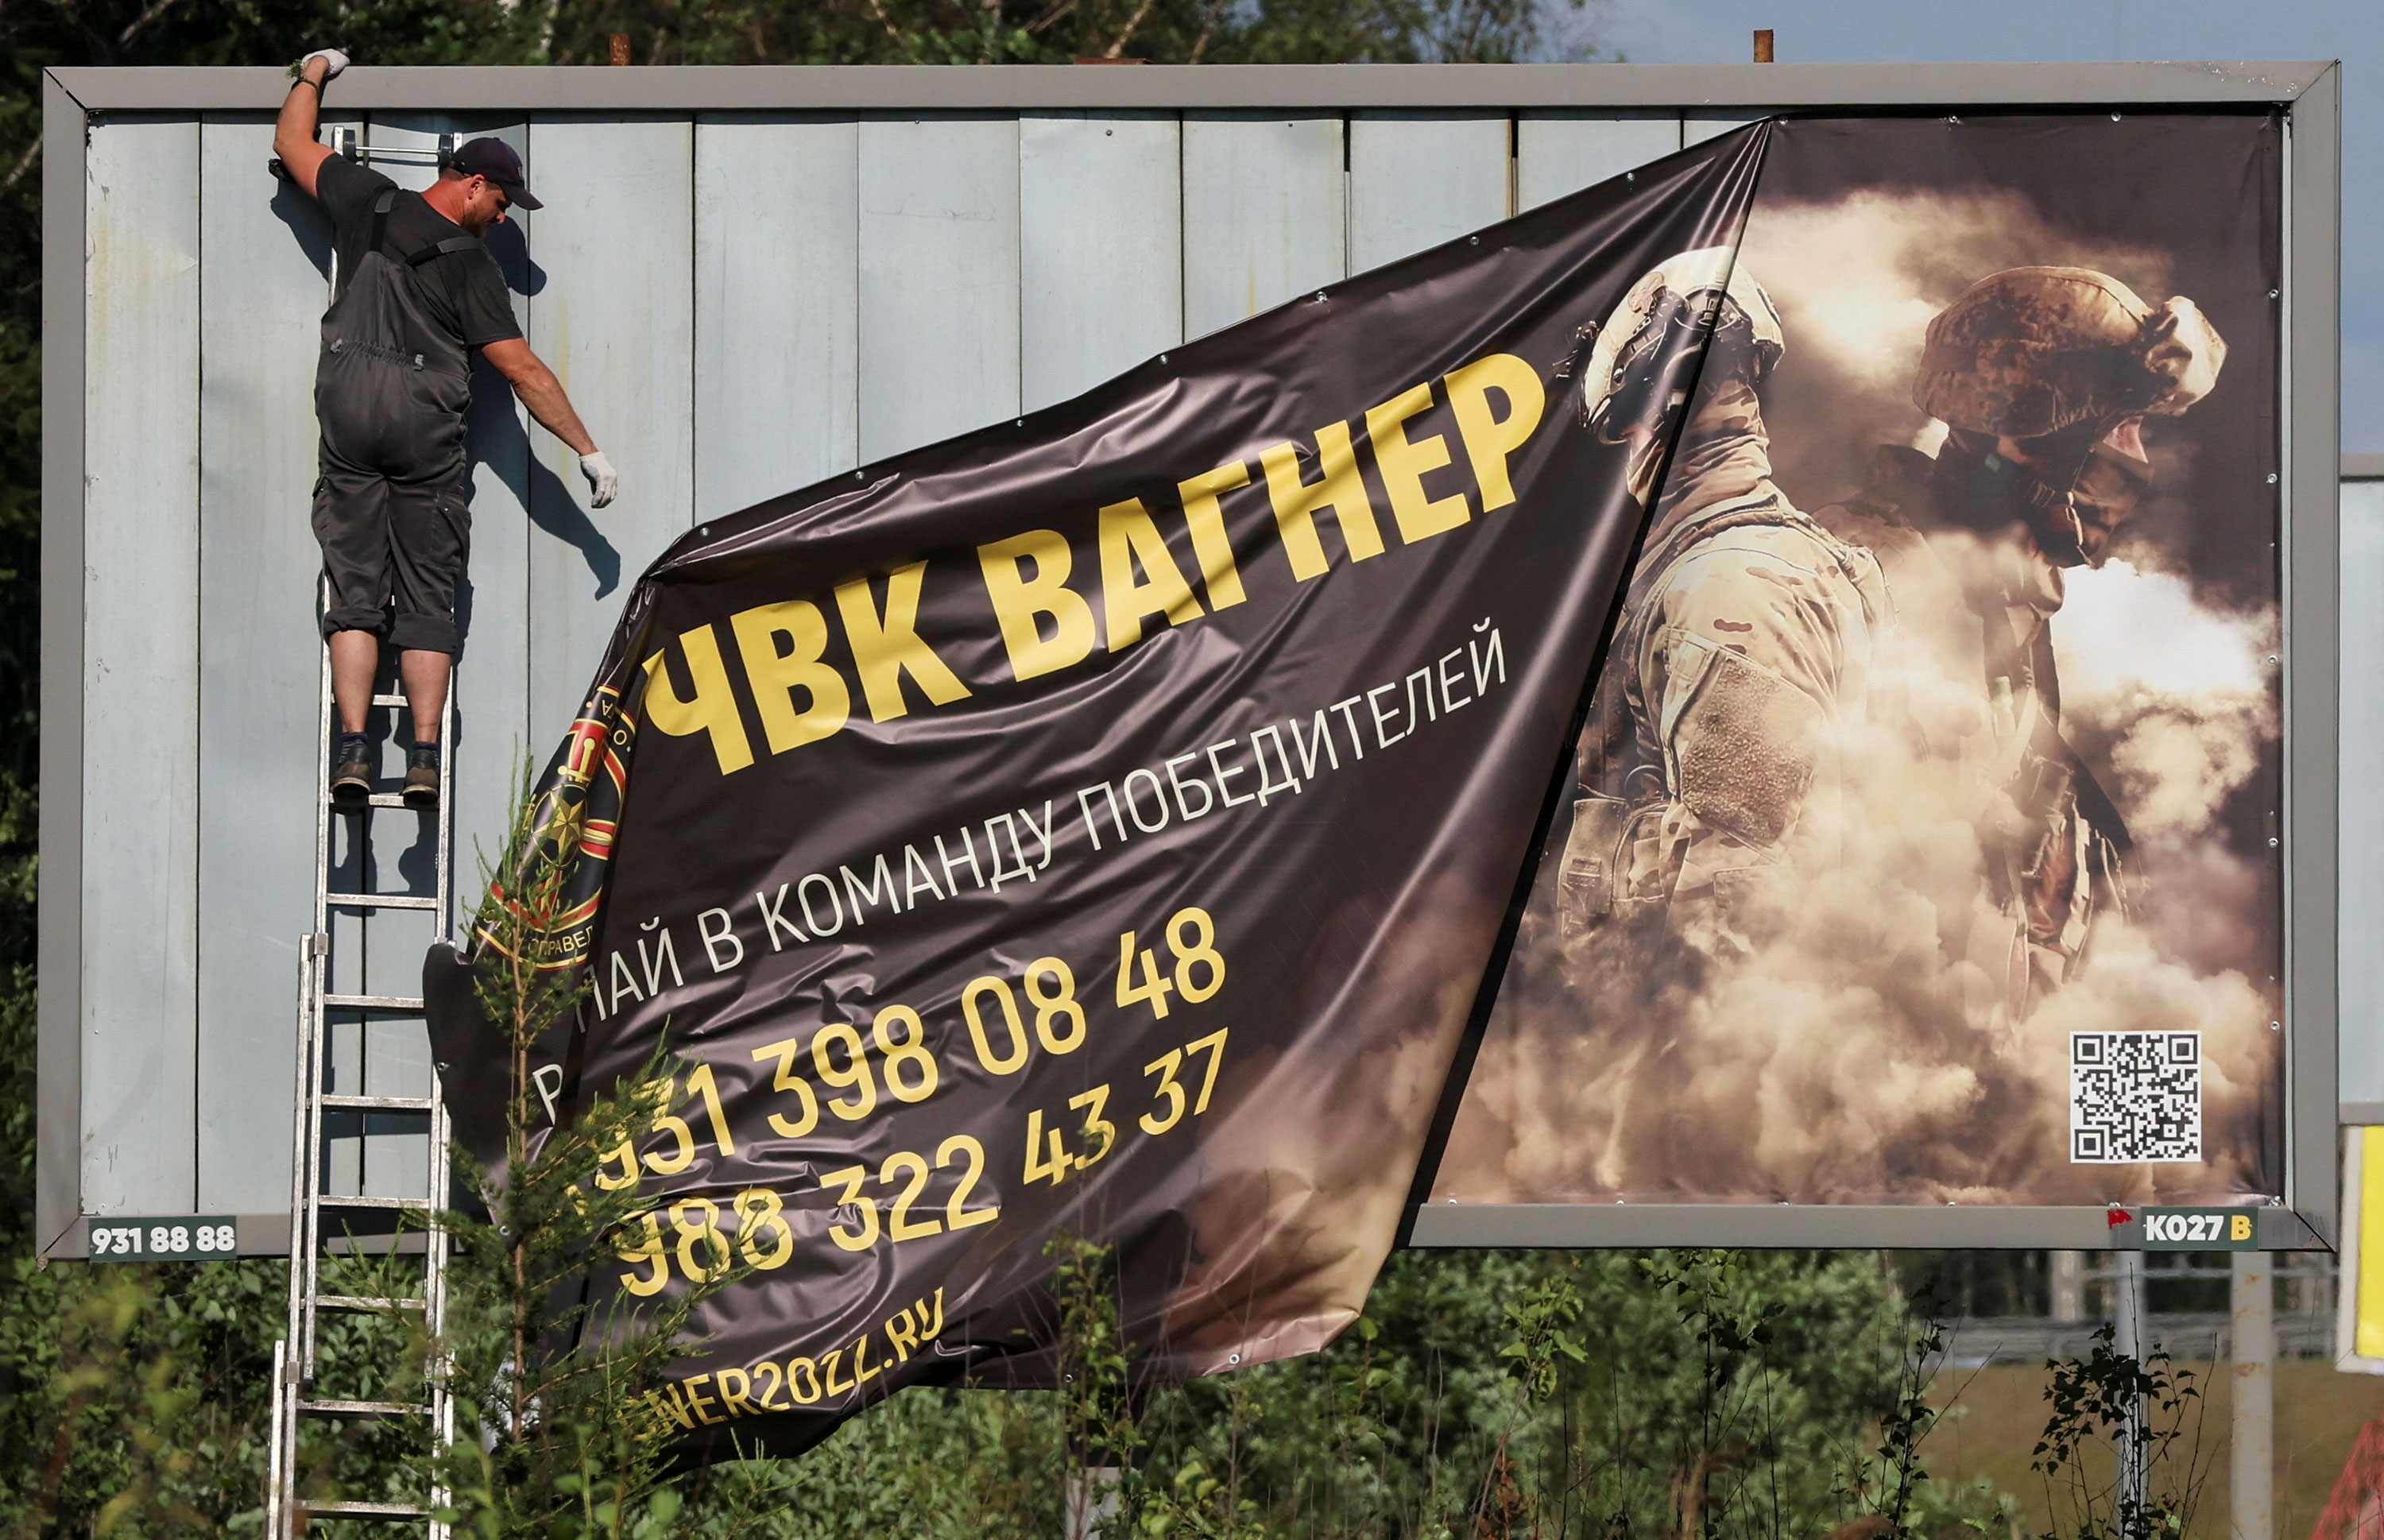 A worker removes an advertising banner promoting service in the Wagner private mercenary group on the outskirts of St. Petersburg, Russia, on Saturday.